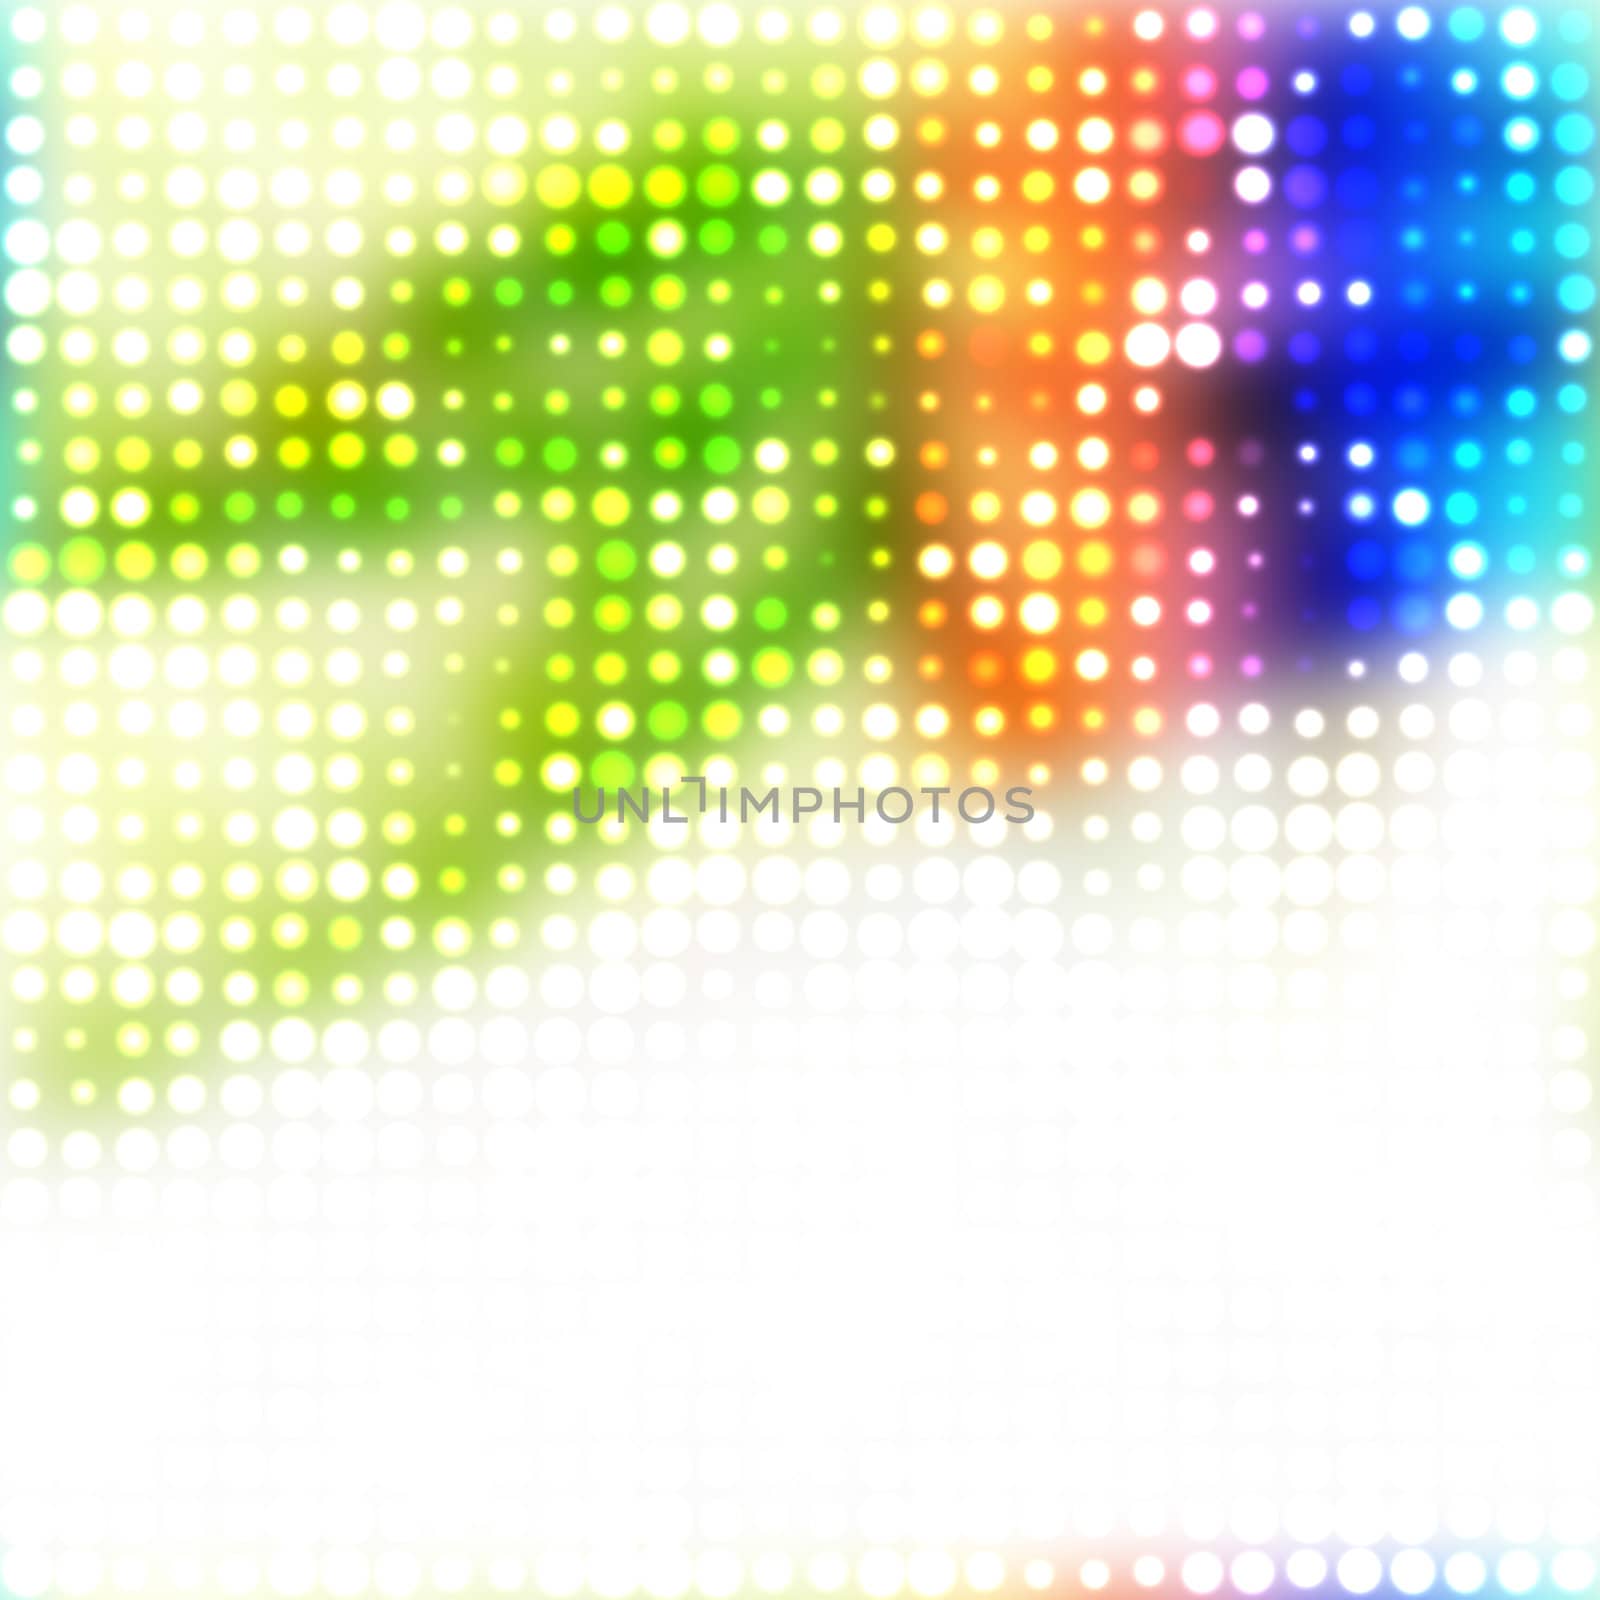 A rainbow colored halftone texture with glowing circles and plenty of copyspace. This image tiles seamlessly as a pattern in any direction.